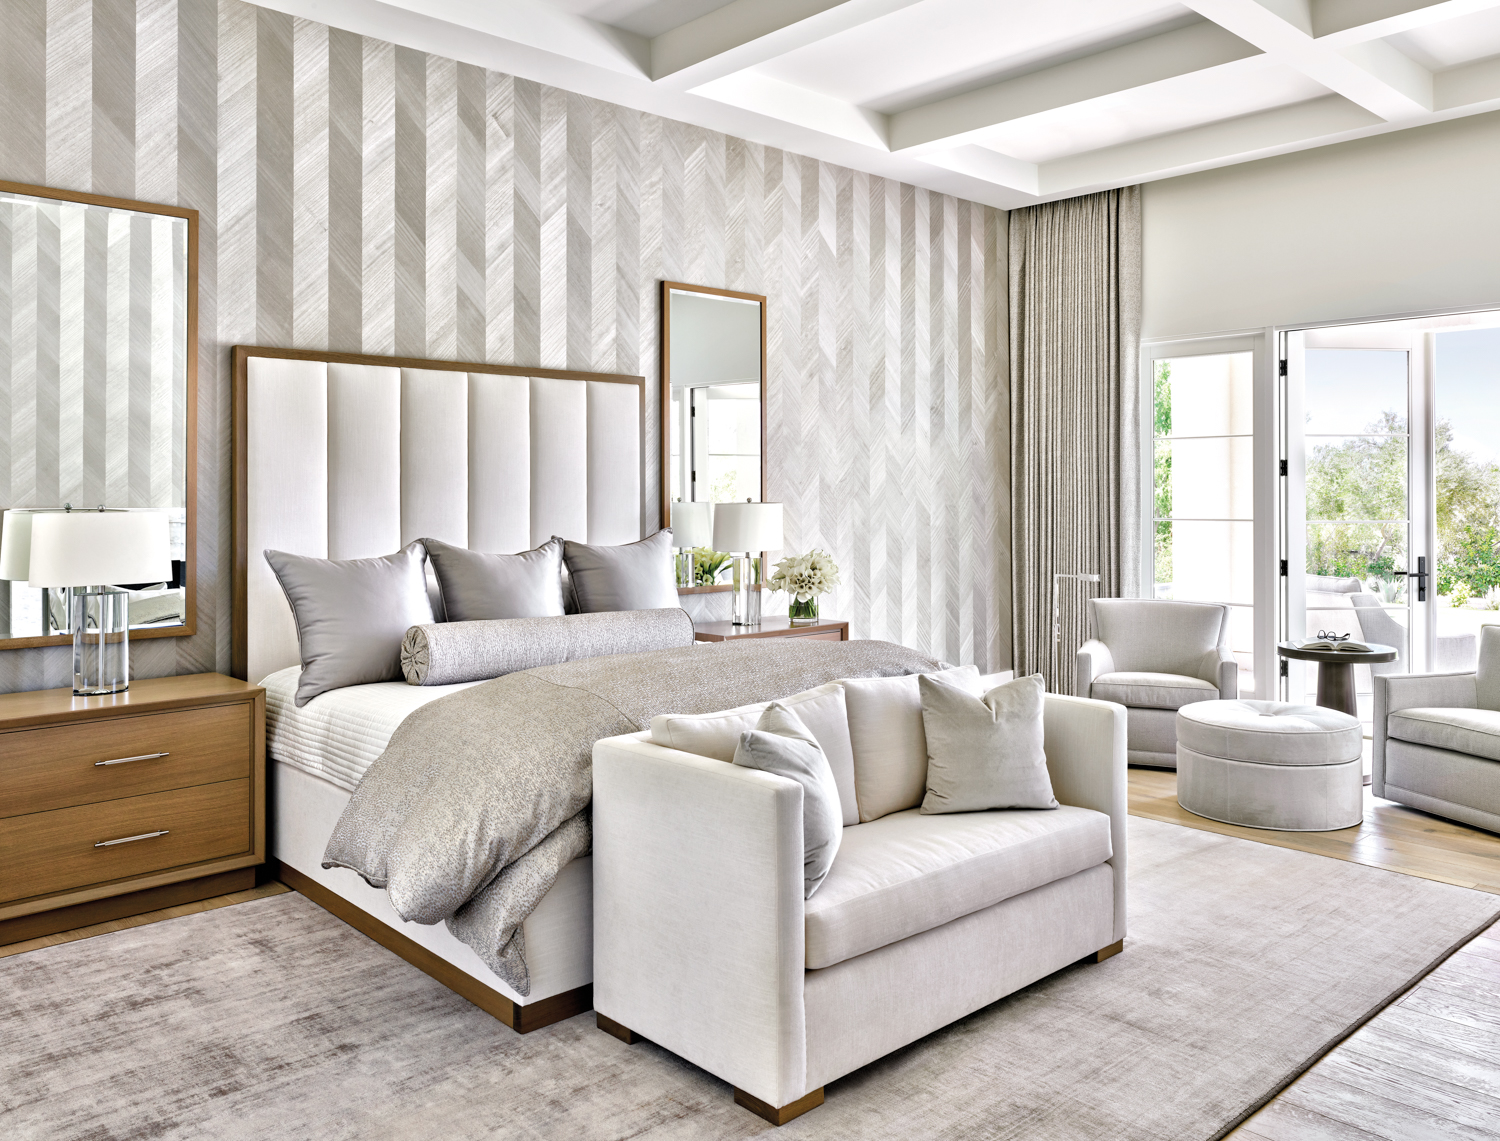 A bedroom with gray furnishings and silvery chevron wallpaper.